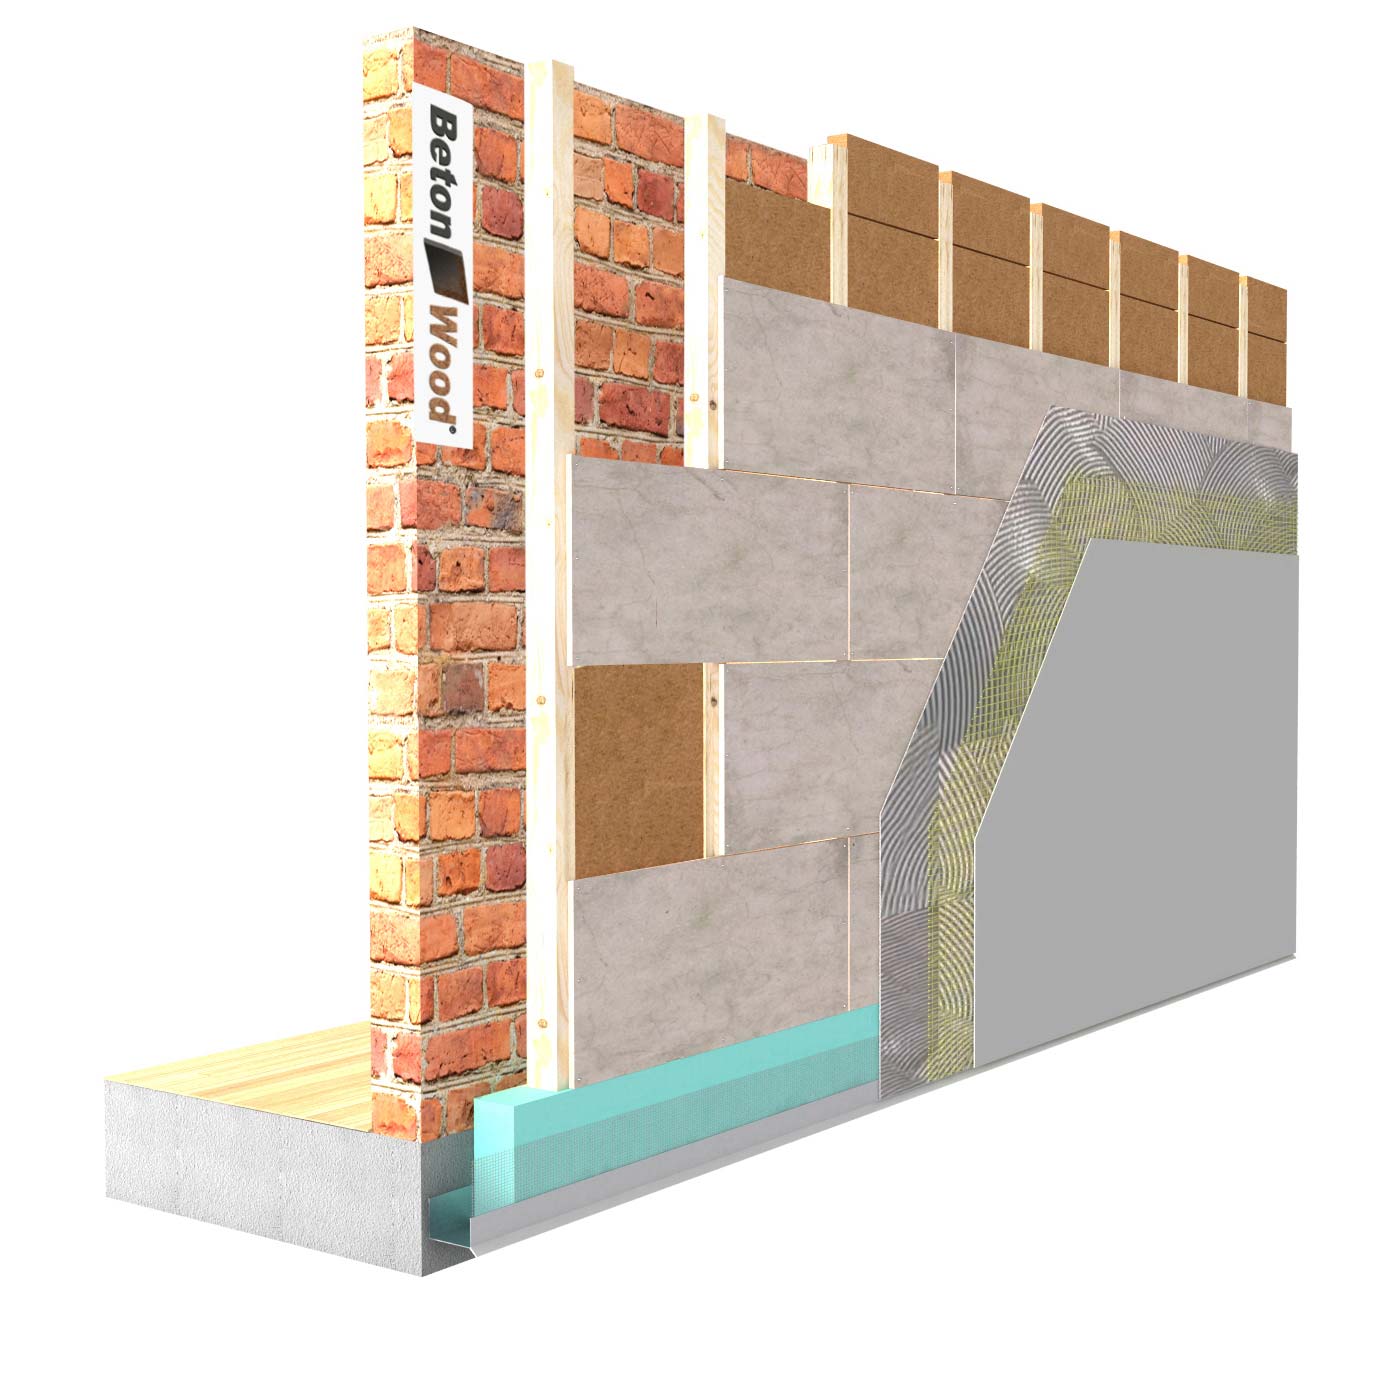 External insulation system with Therm fiber wood on masonry